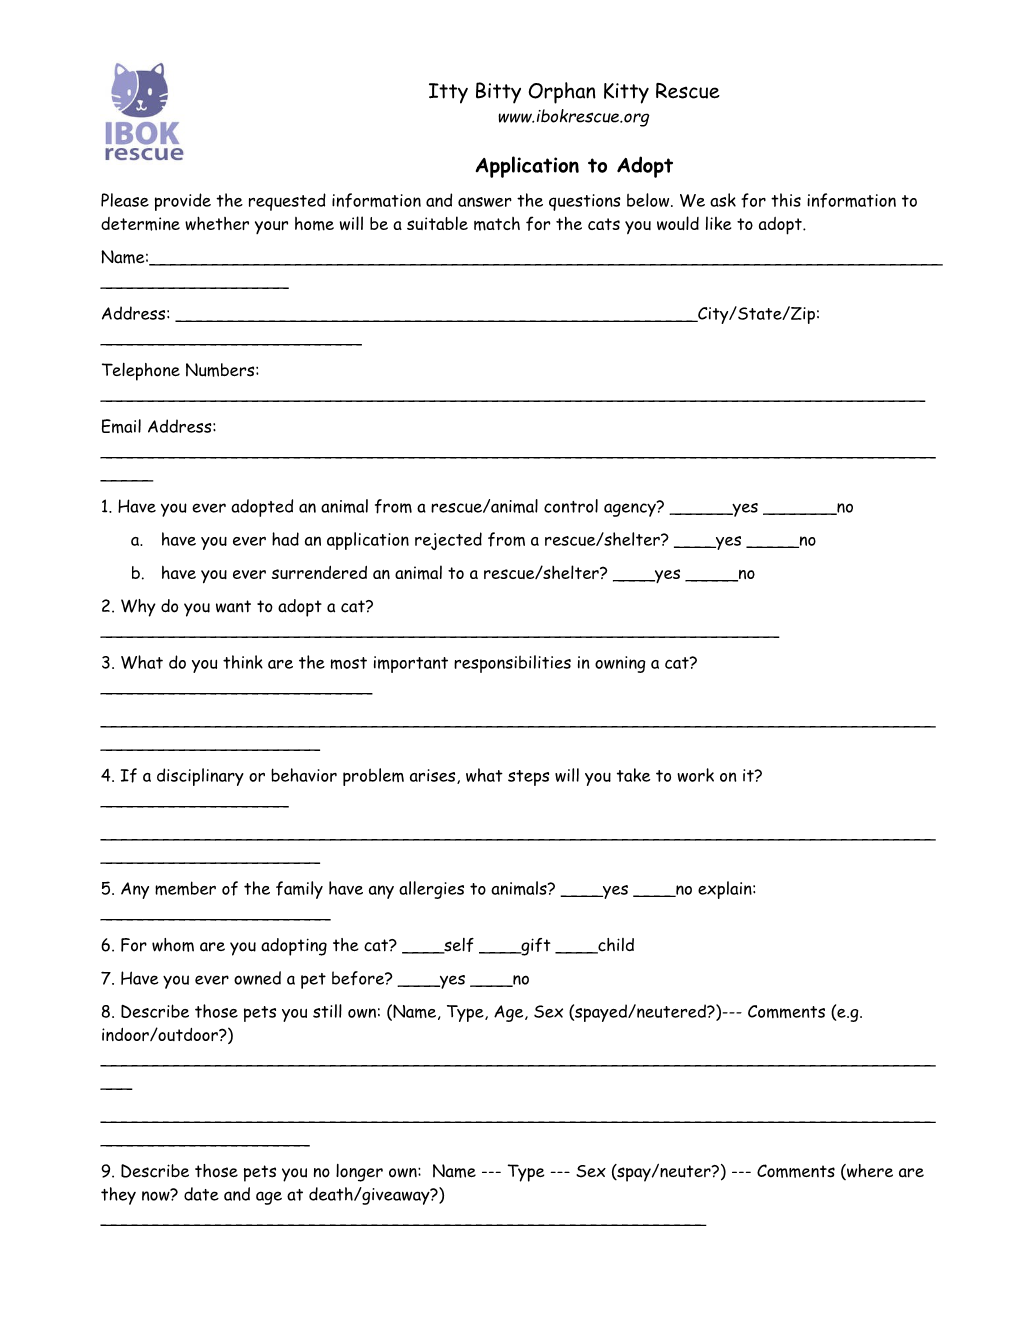 Enclosed Is an Adoption Application for You to Complete and Return to Me Via Email